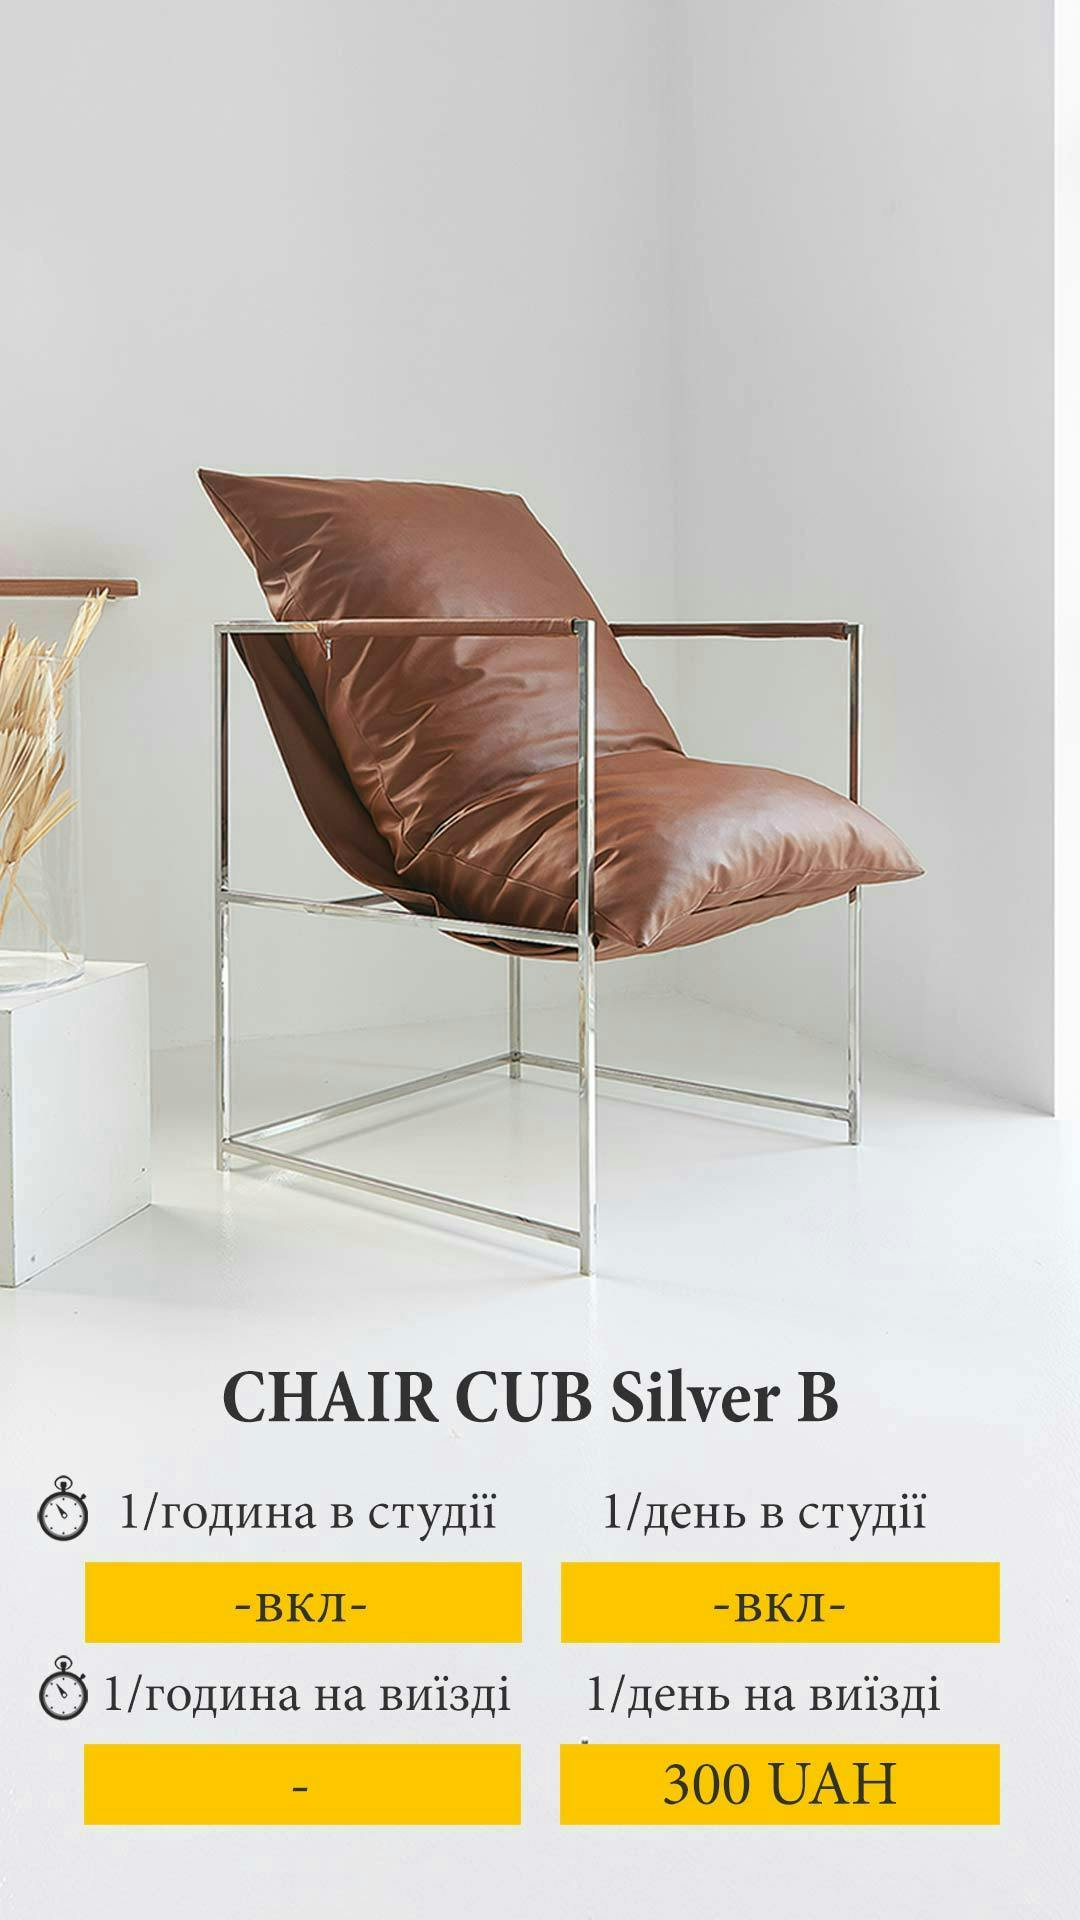 Cover image from chair-cub-silver-b